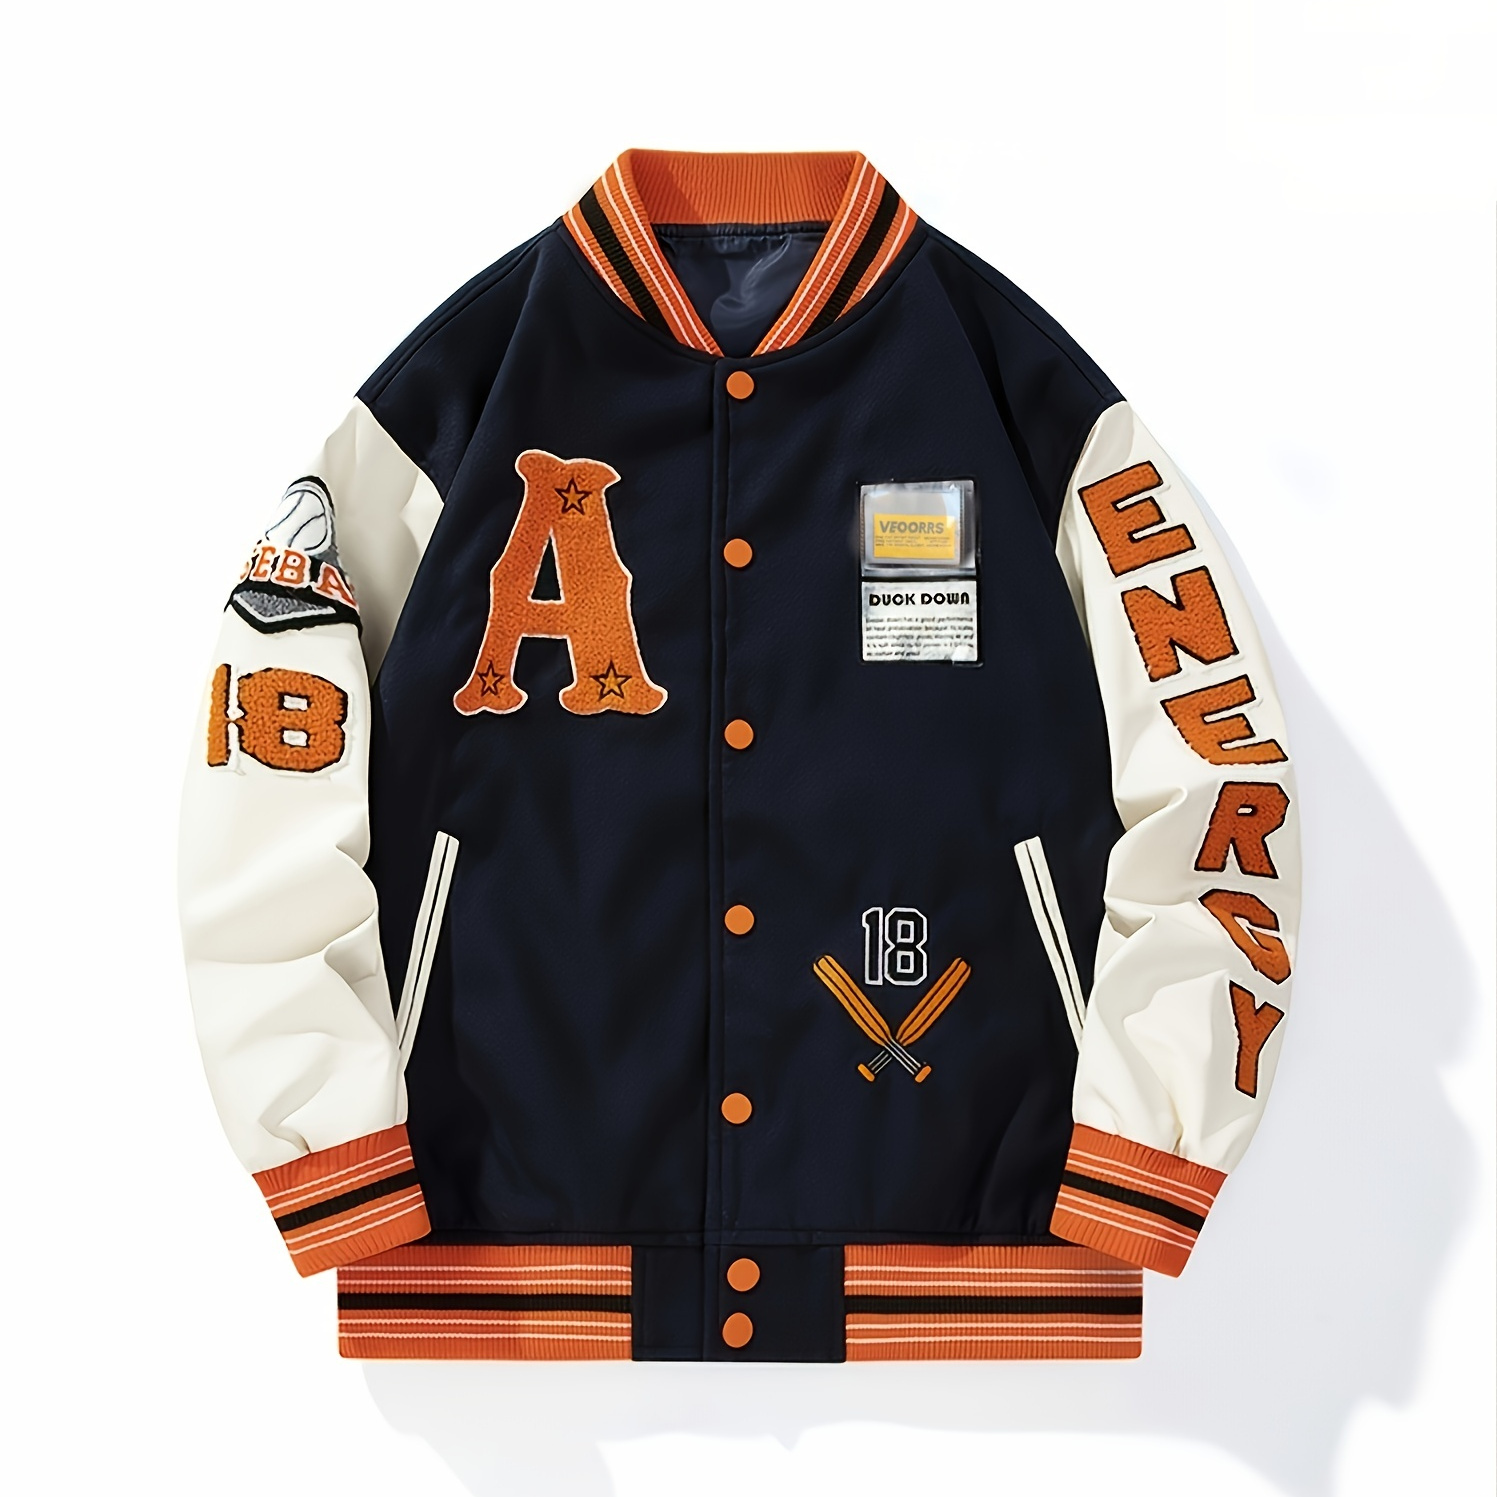 Men's Casual Baseball Jacket New Retro Embroidered Print Jacket Best ...